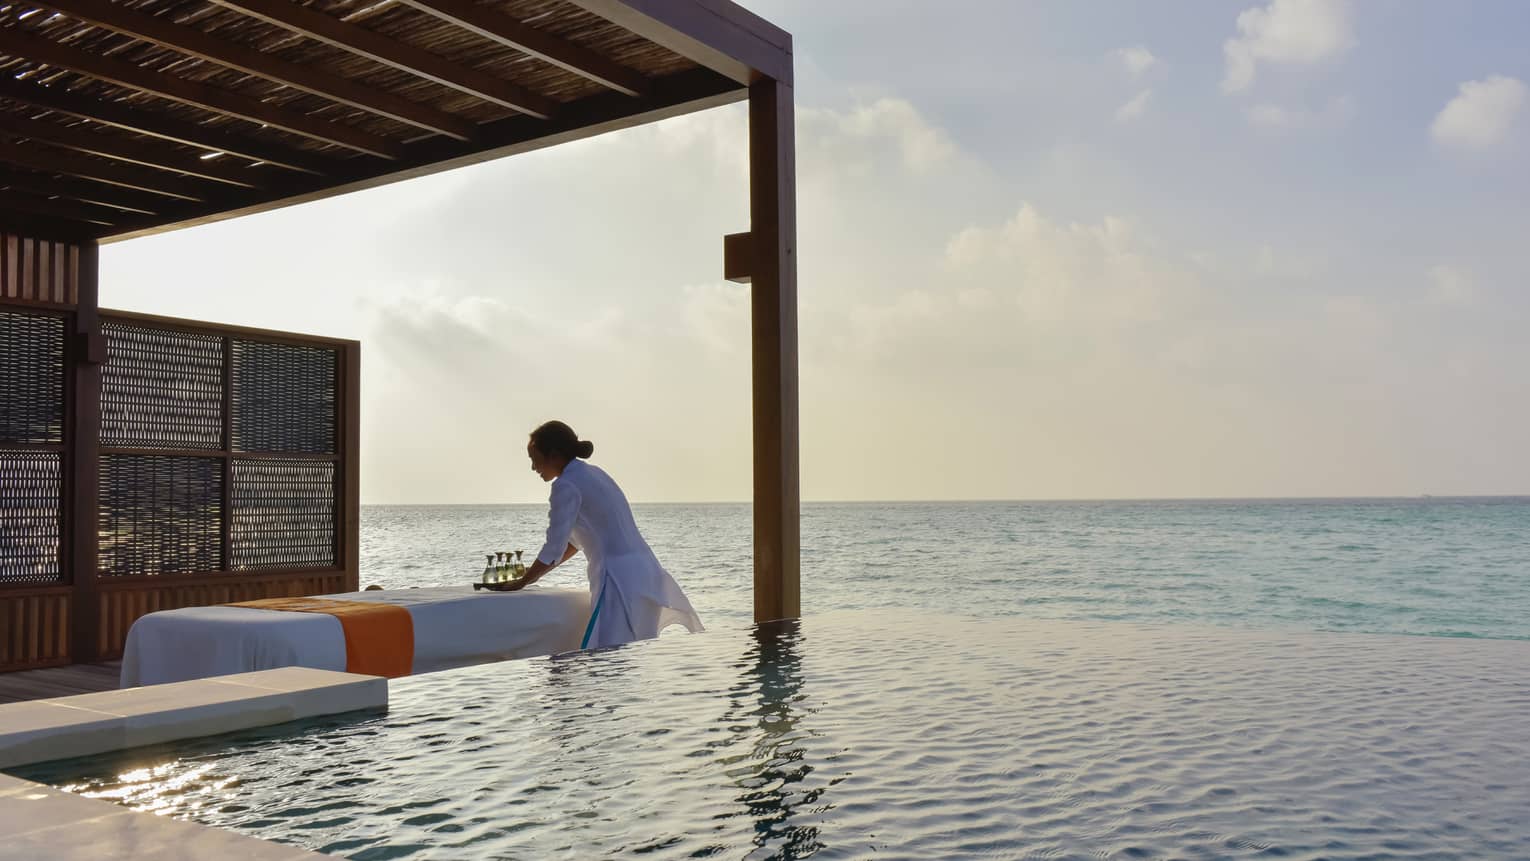 Woman sets tray down on table in front of infinity pool alongside ocean